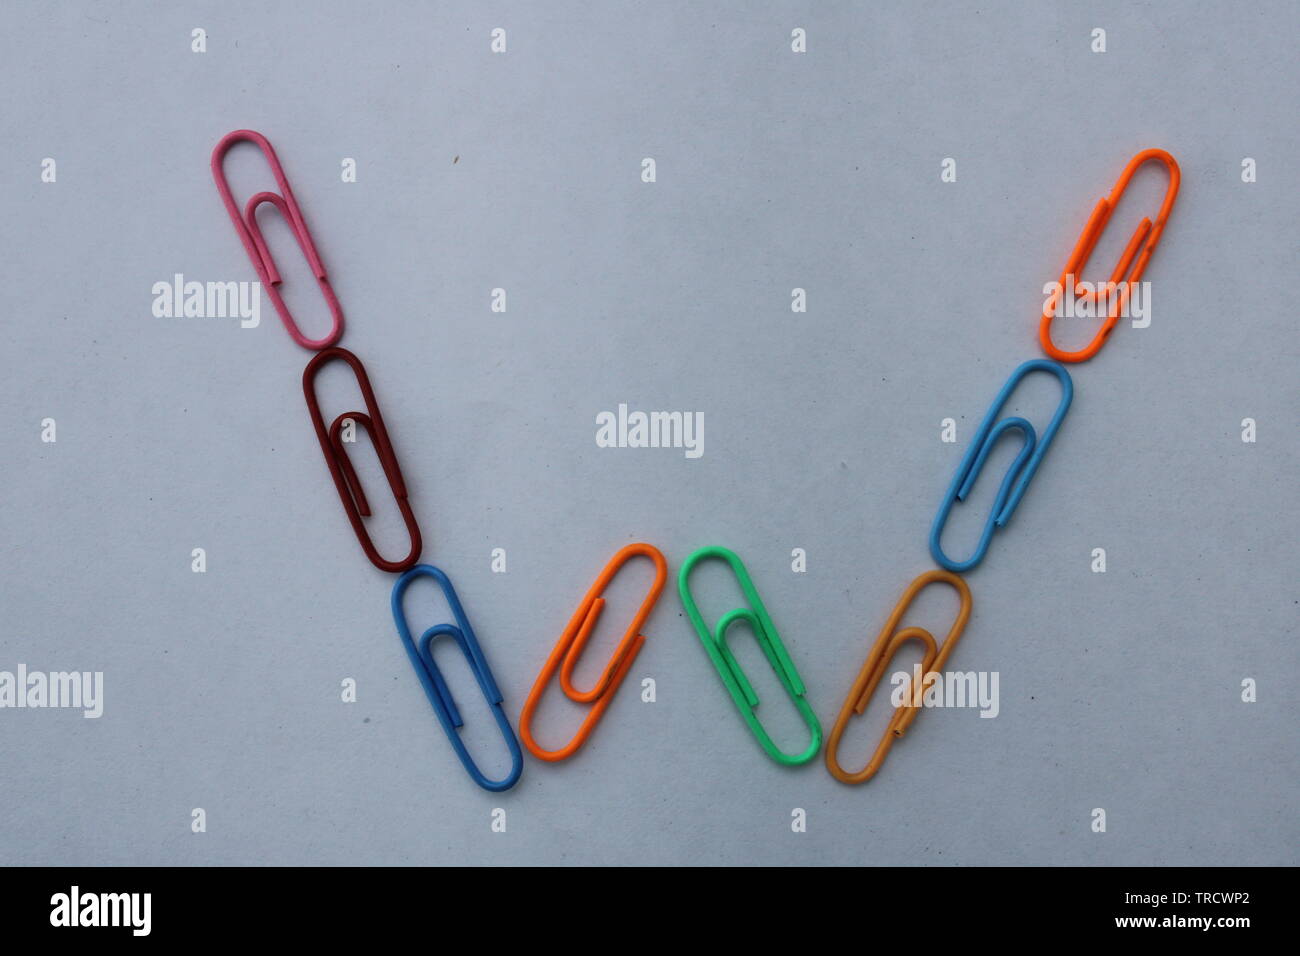 Letter W made with colorful paper clips on white background Stock Photo